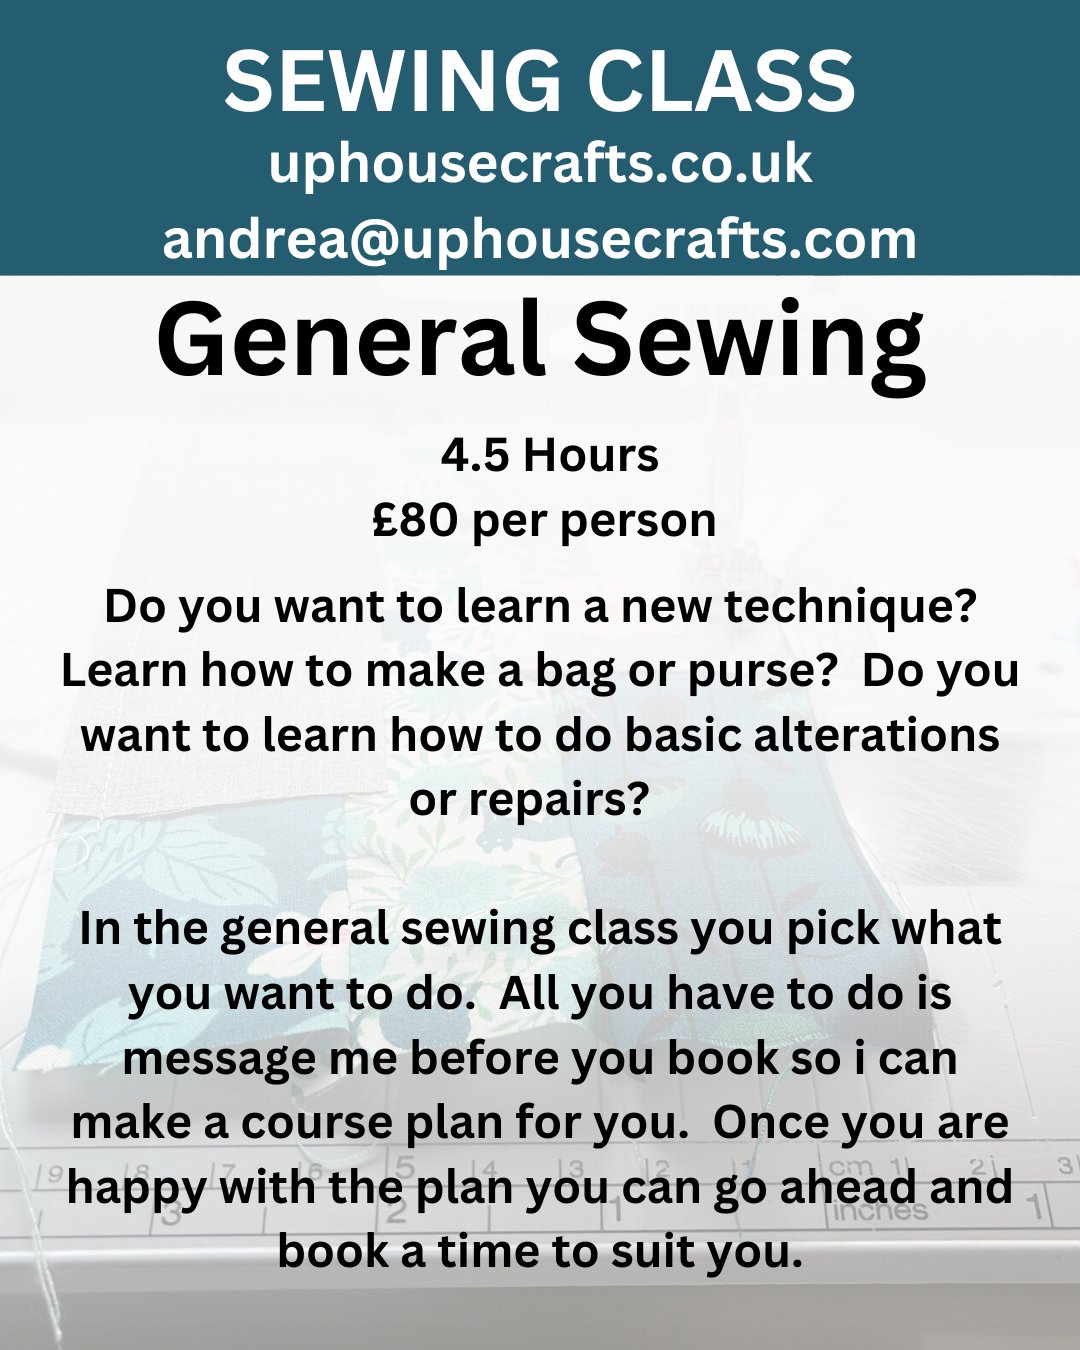 Sewing Classes in Shetland @ Uphouse Crafts - Uphouse Crafts